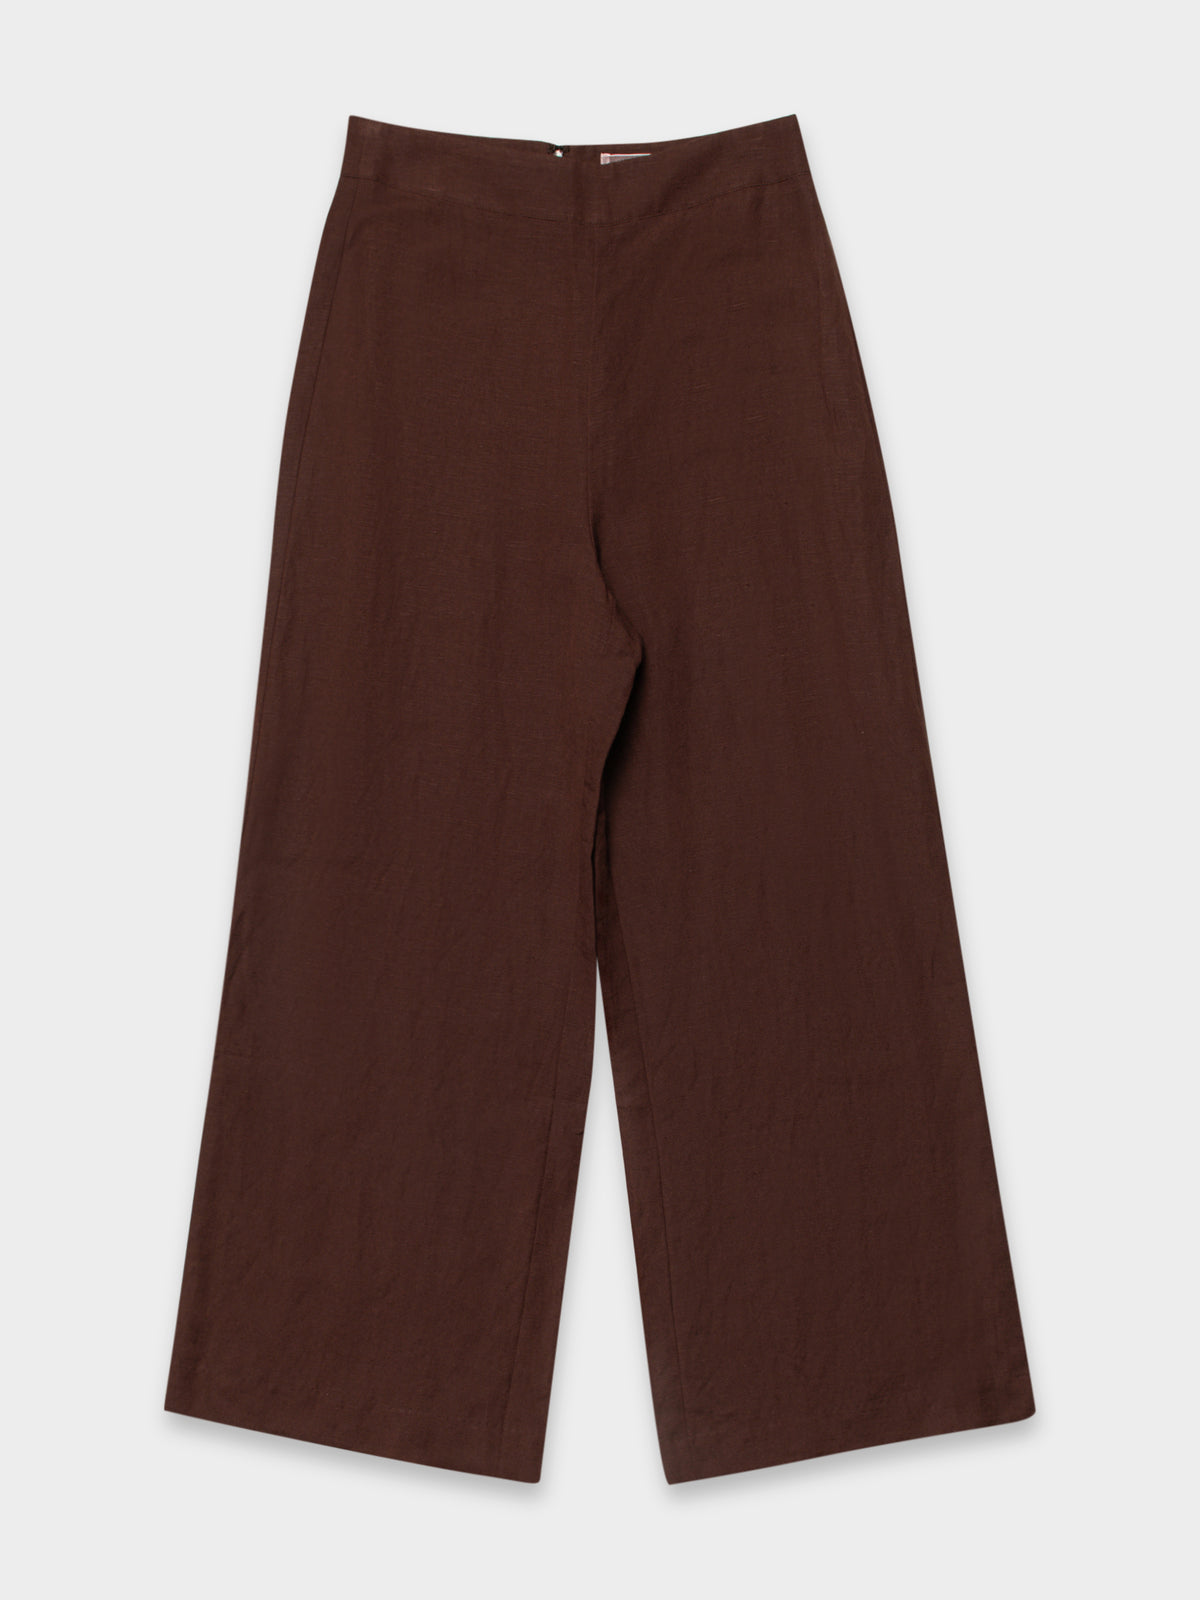 Desiree Linen Culotte Pants in Cacao